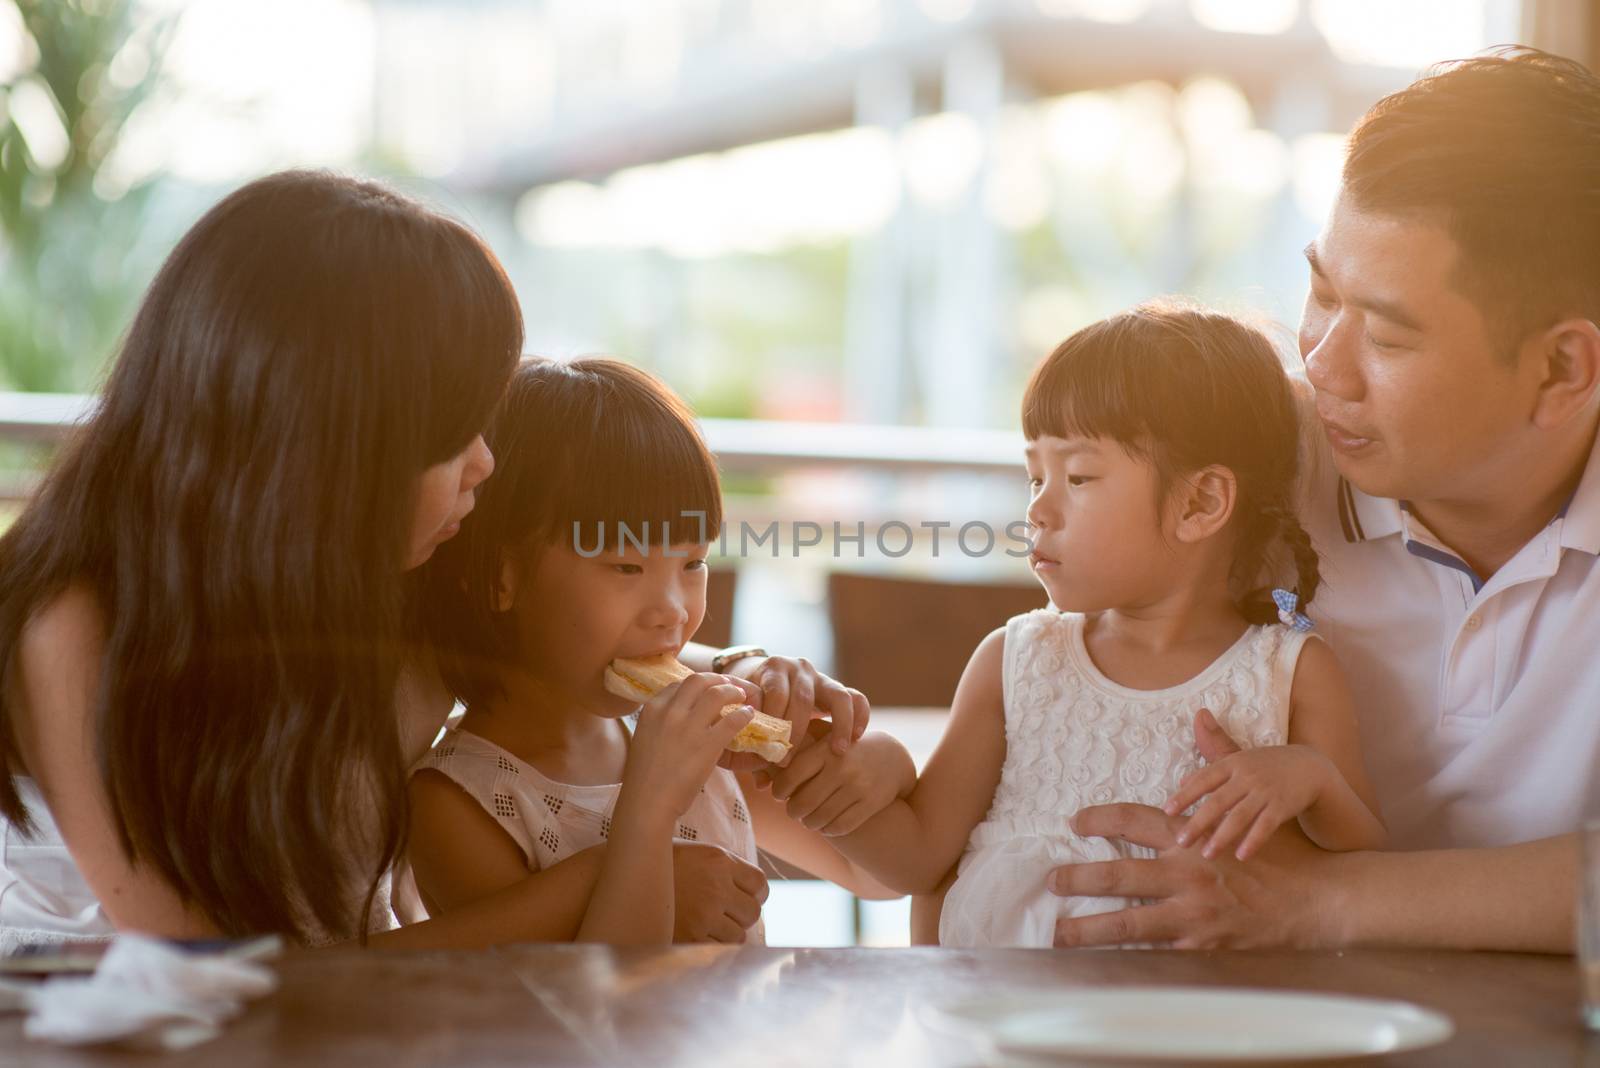 Children eating and sharing bread at cafeteria. Asian family outdoor lifestyle with natural light.